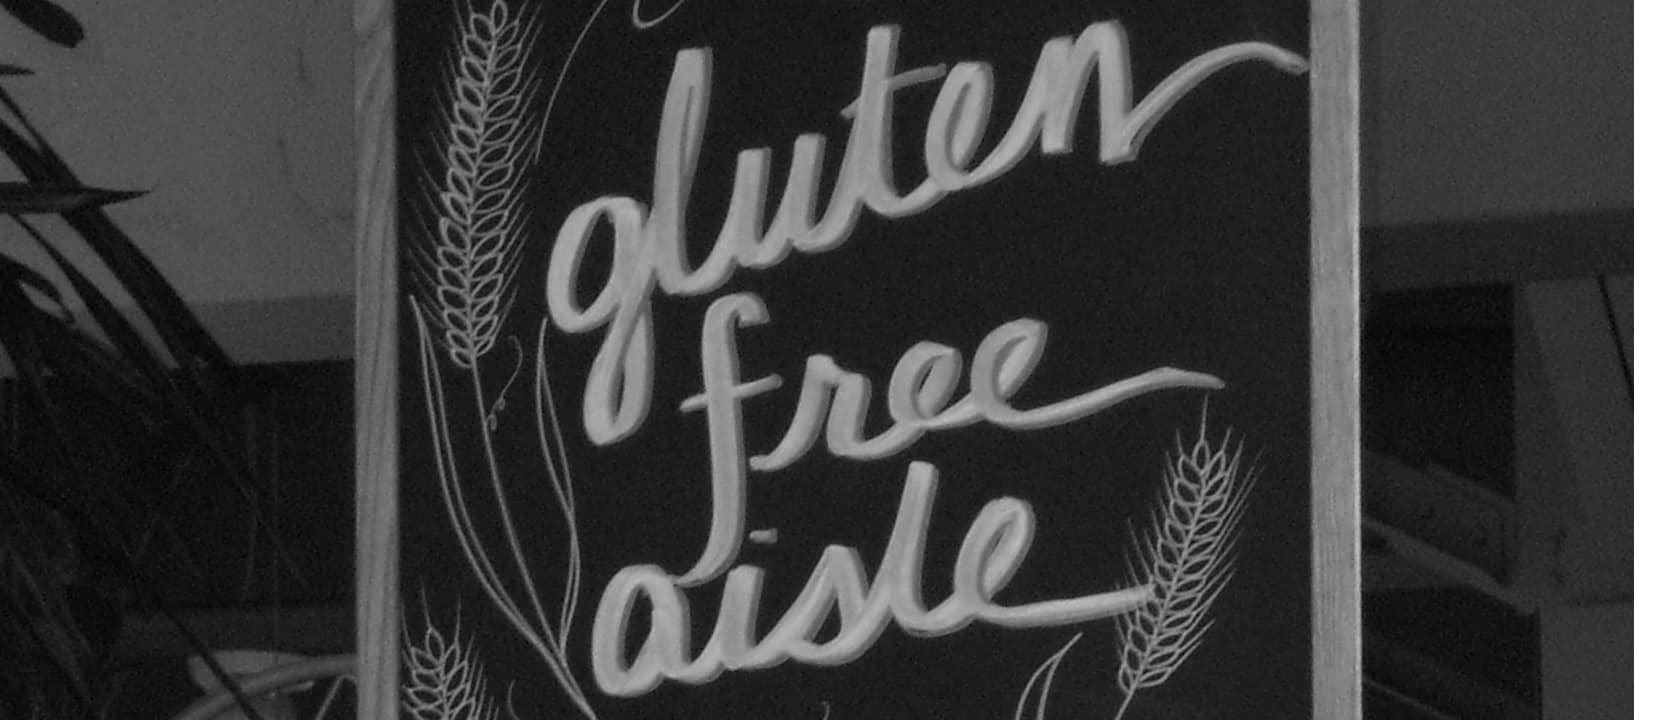 Gluten-Free Diets - Separating the Wheat from the Chat